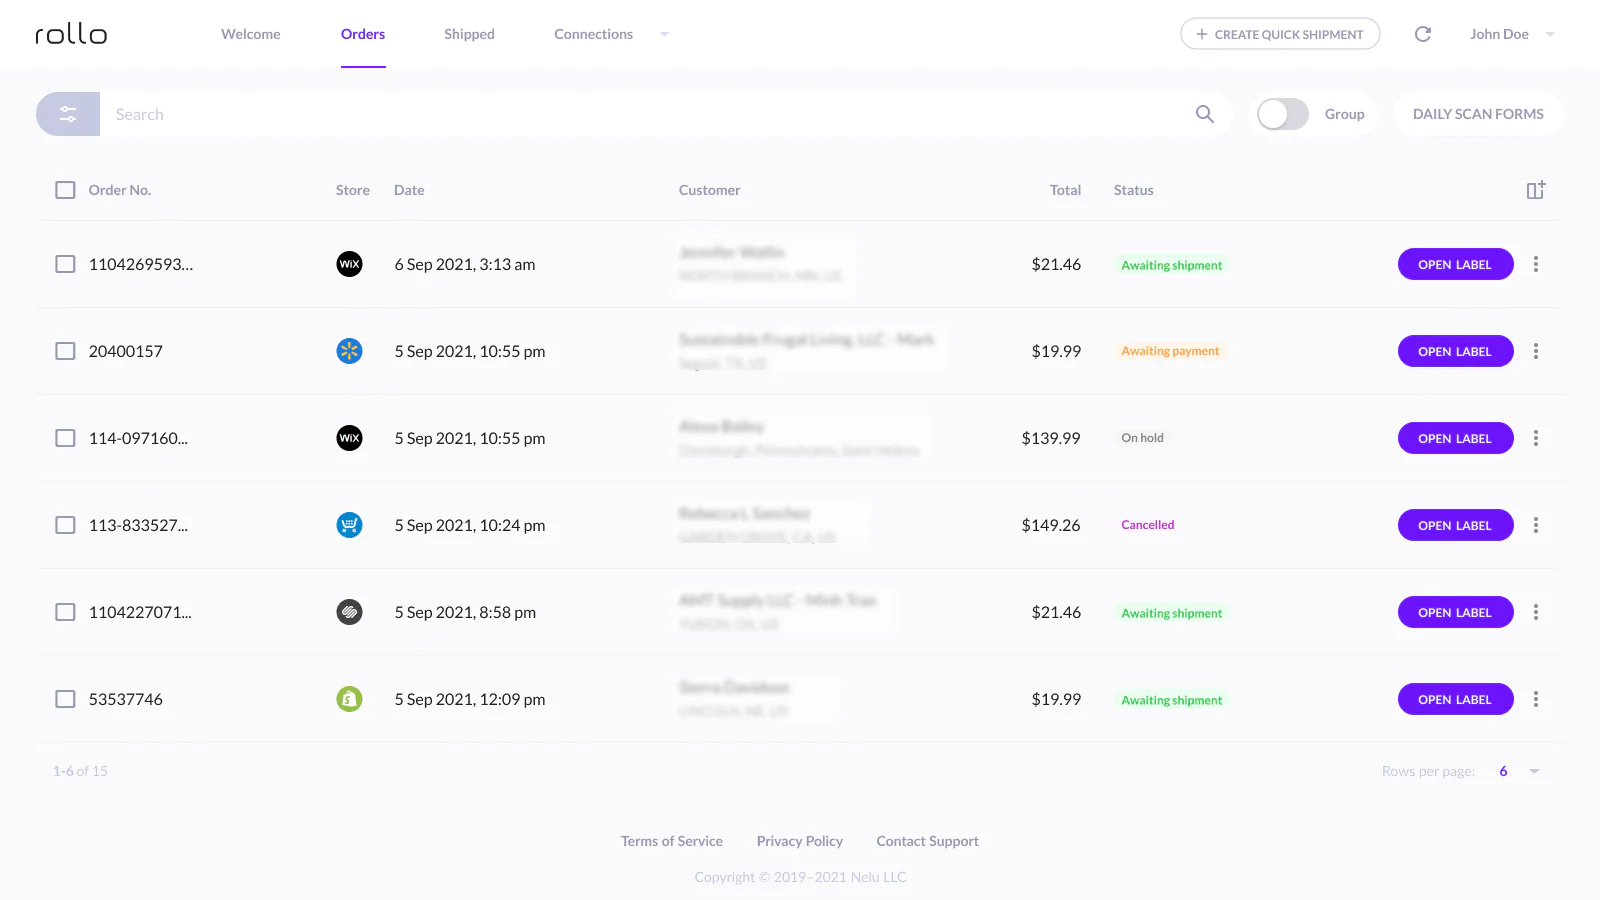 Orders Dashboard from Rollo app.